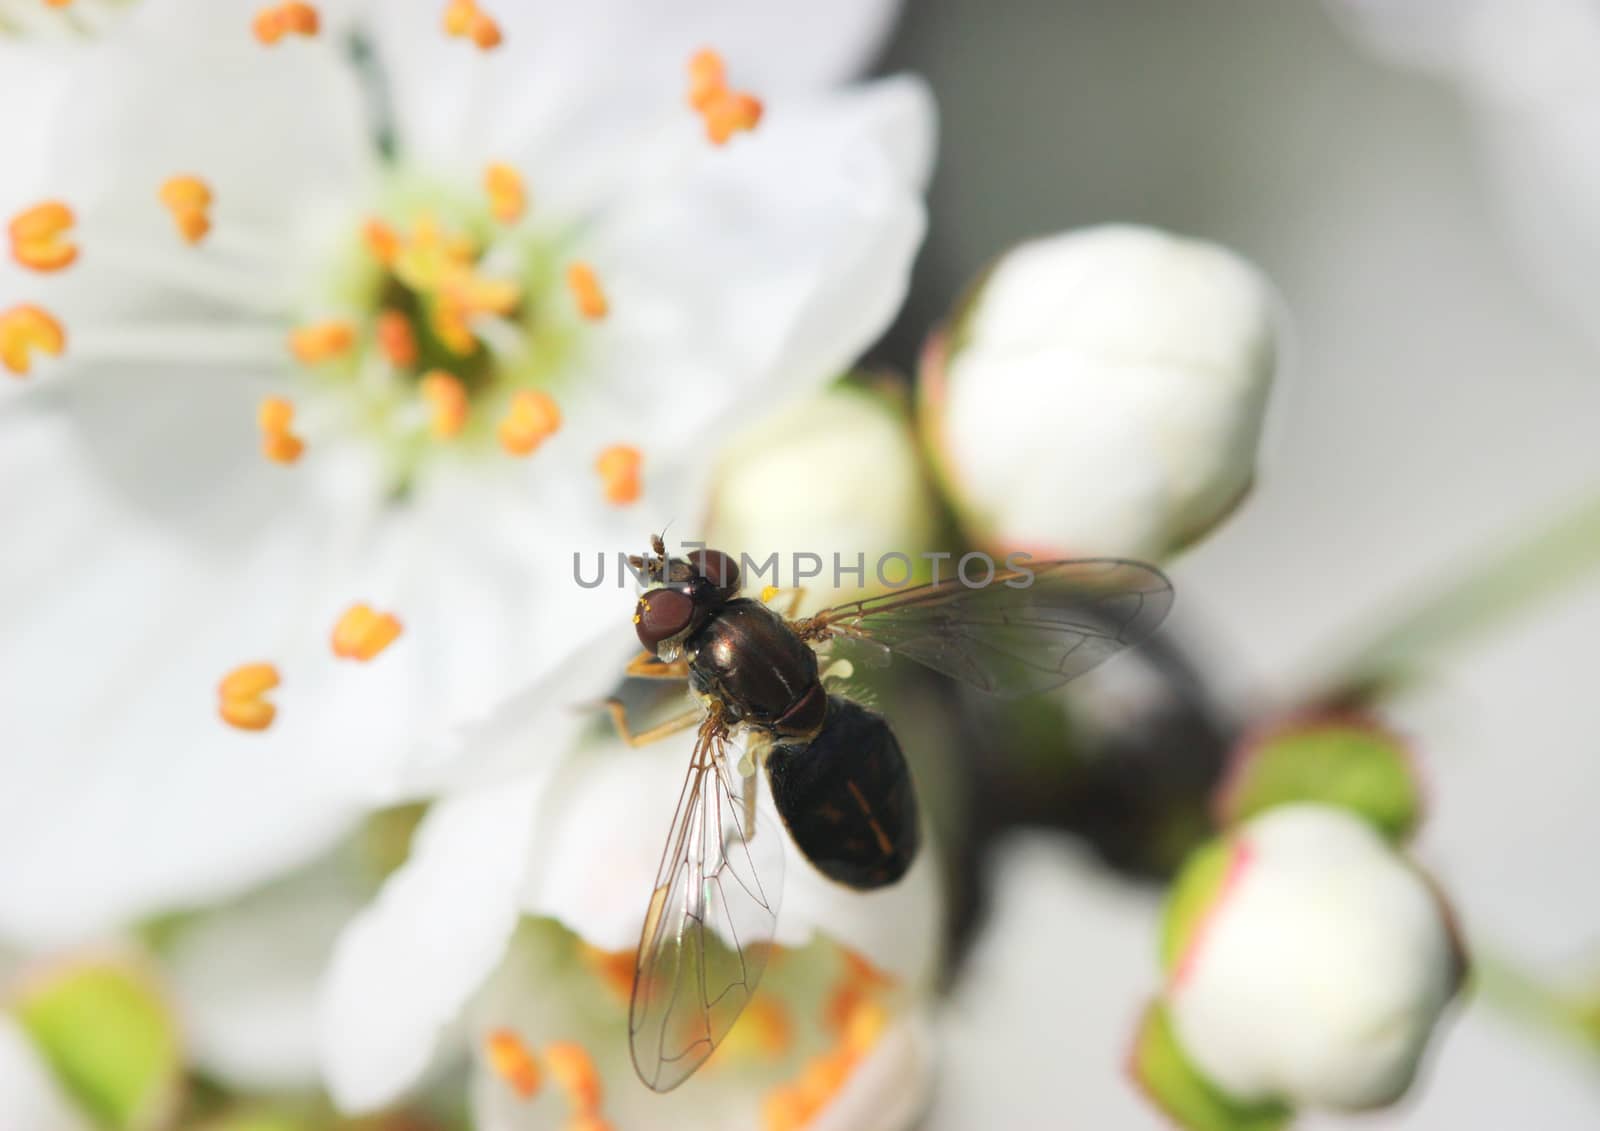 Small insect on spring blossom